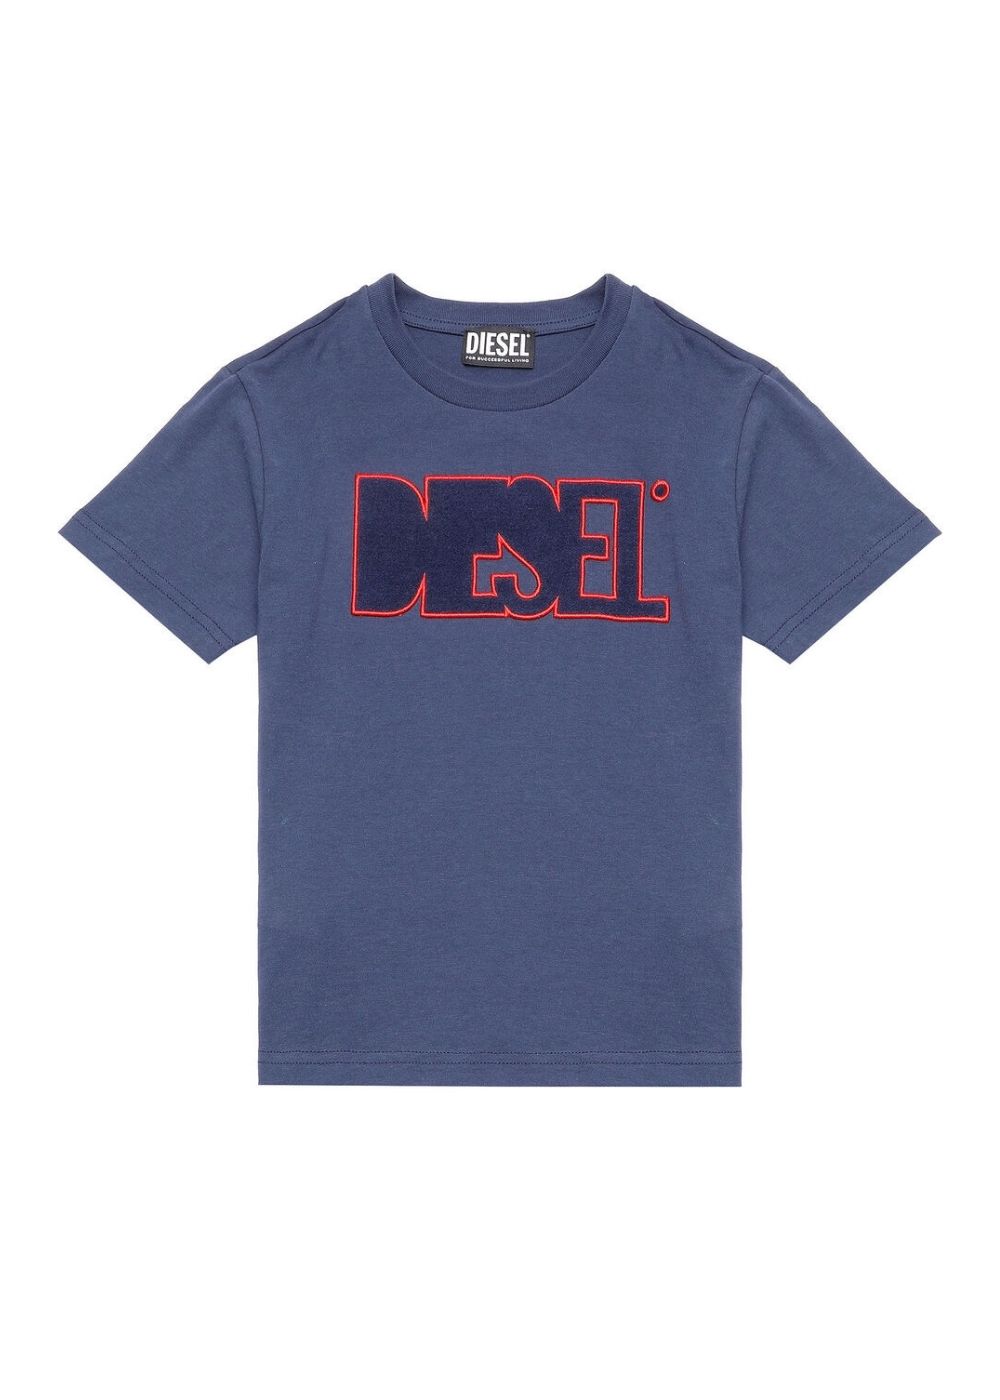 Featured image for “Diesel T-shirt Logo”